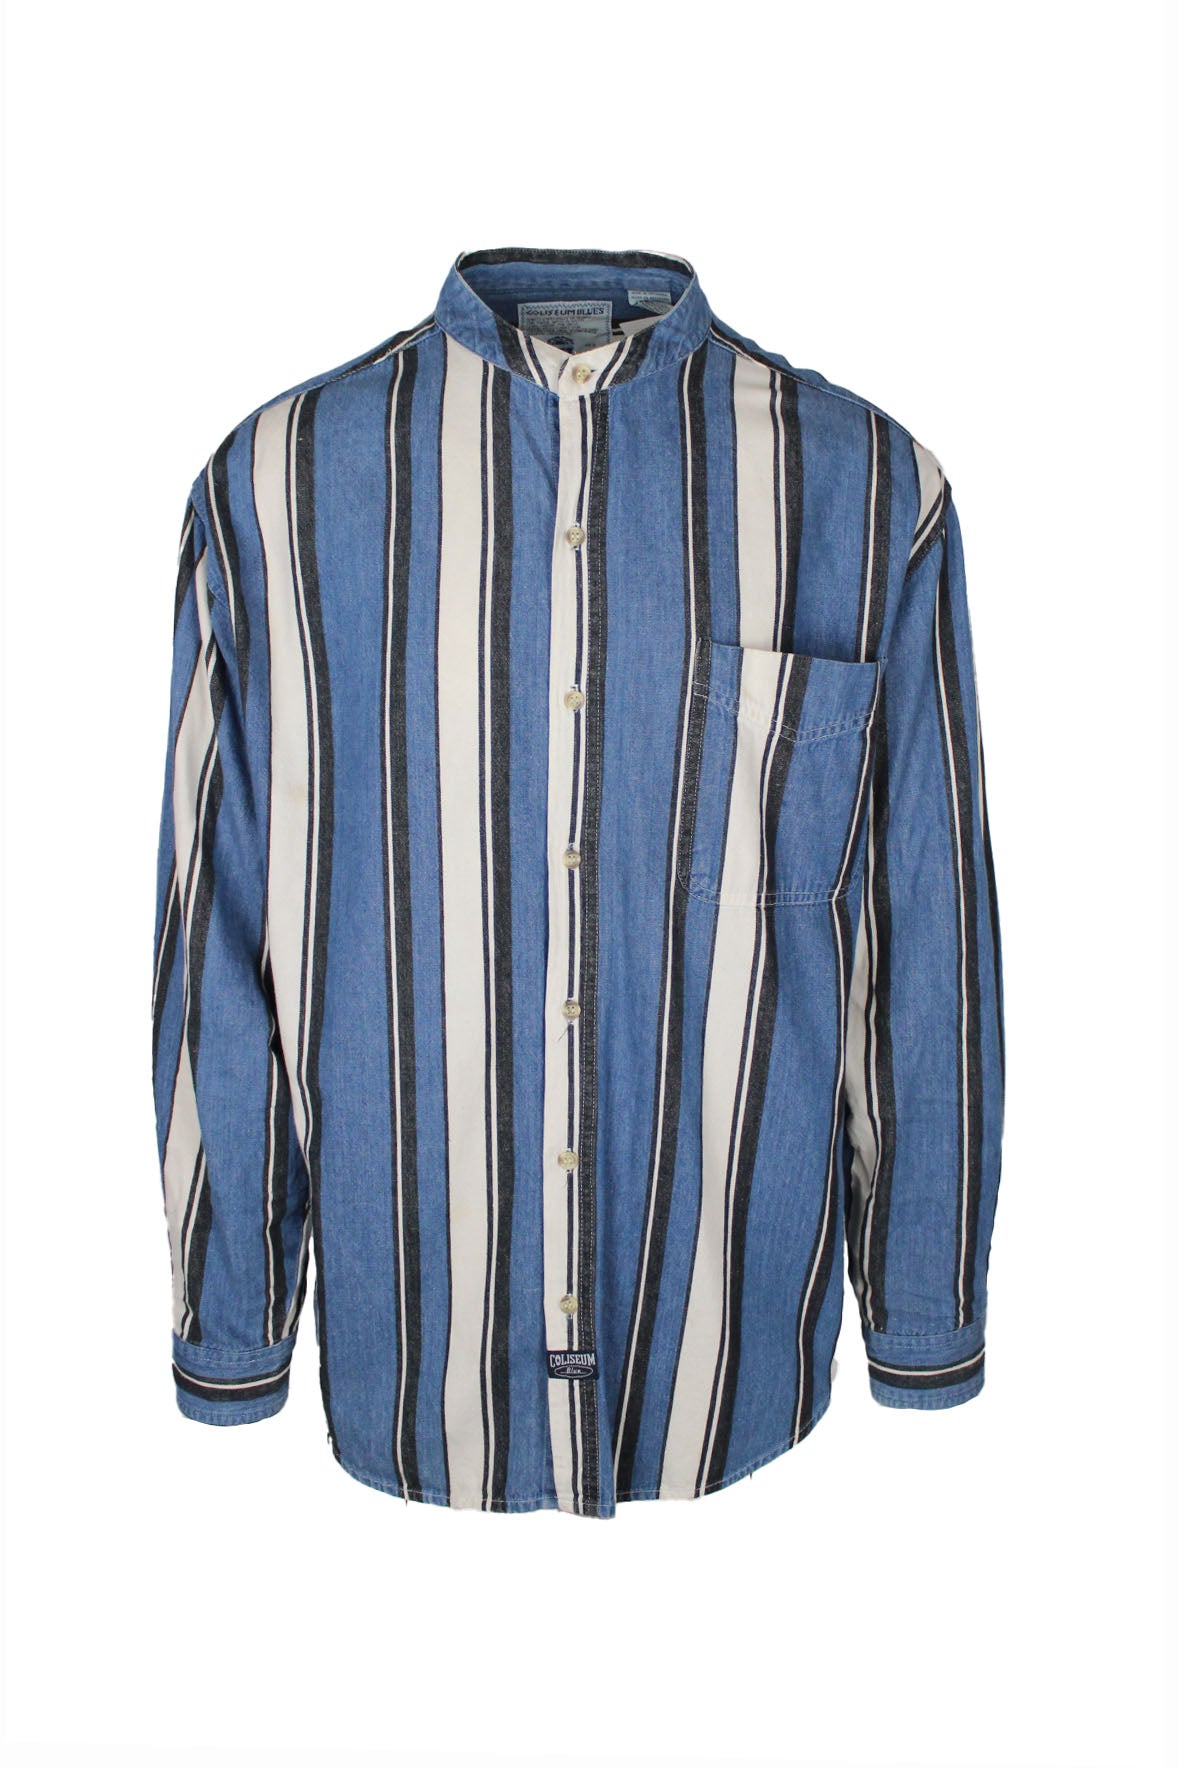 front view of vintage coliseum blues multi blue/white striped long sleeve button up denim shirt. features left breast pocket, band collar, and ‘coliseum blue’ logo tag at bottom of placket.